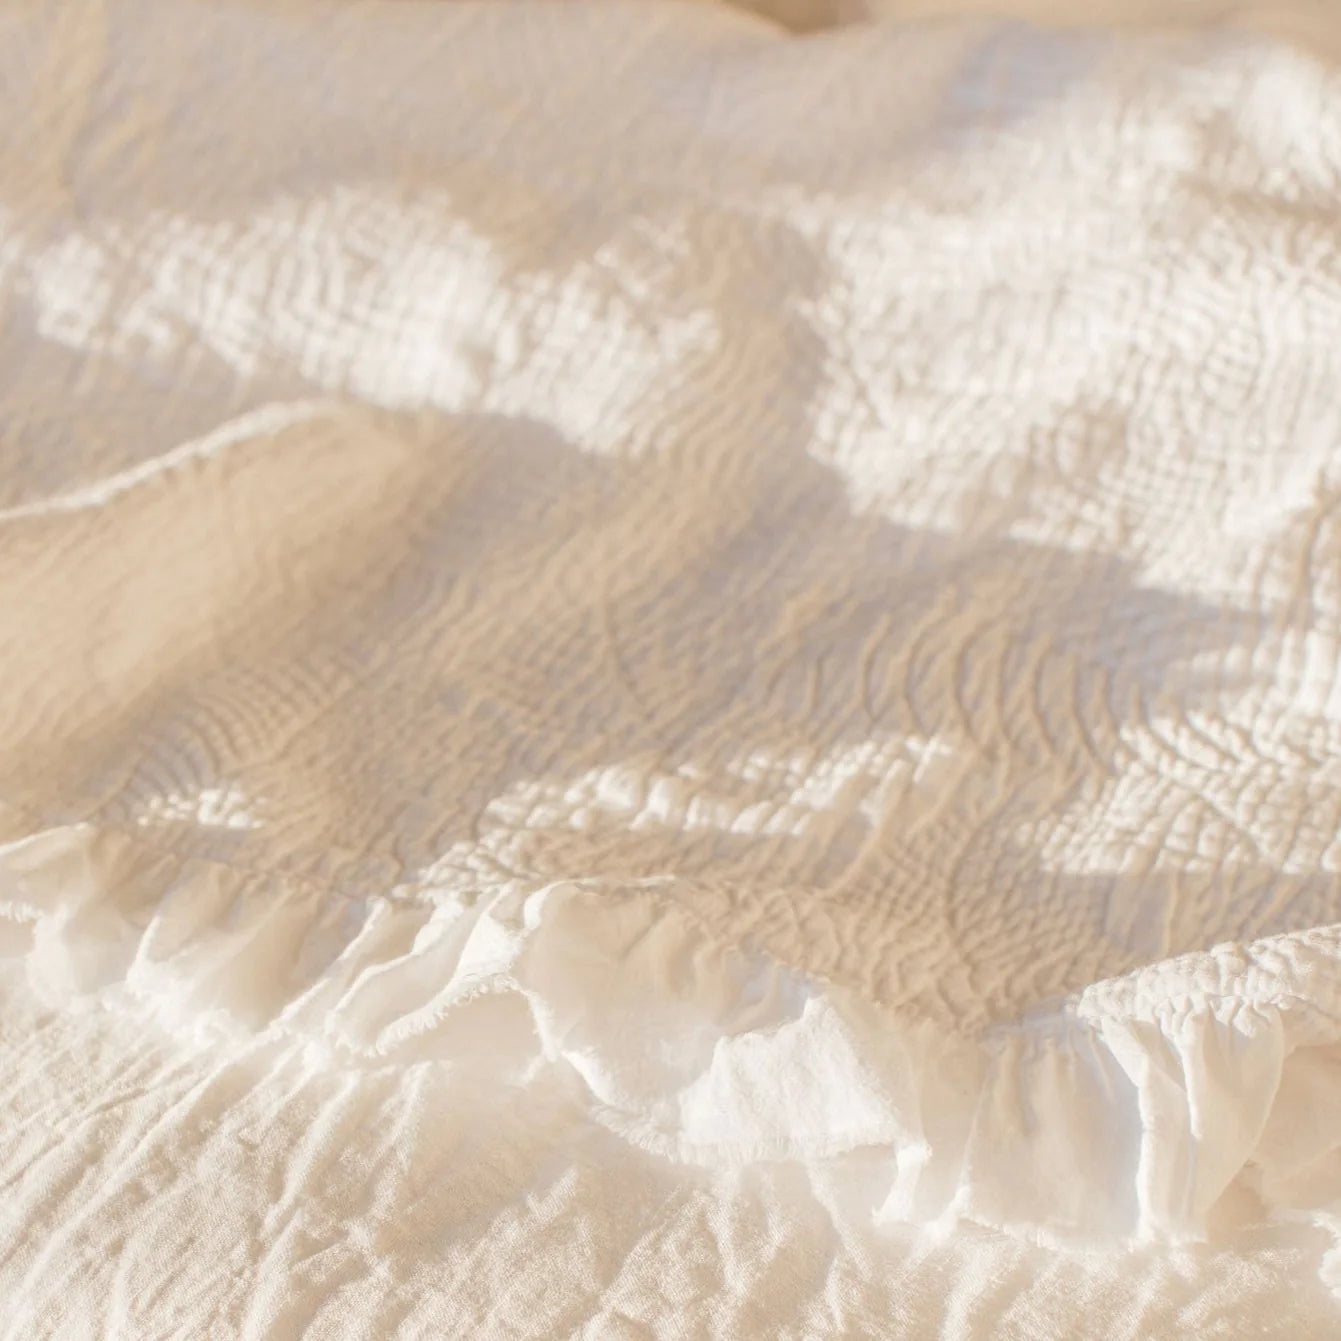 Textured white bedspread in the sunshine.